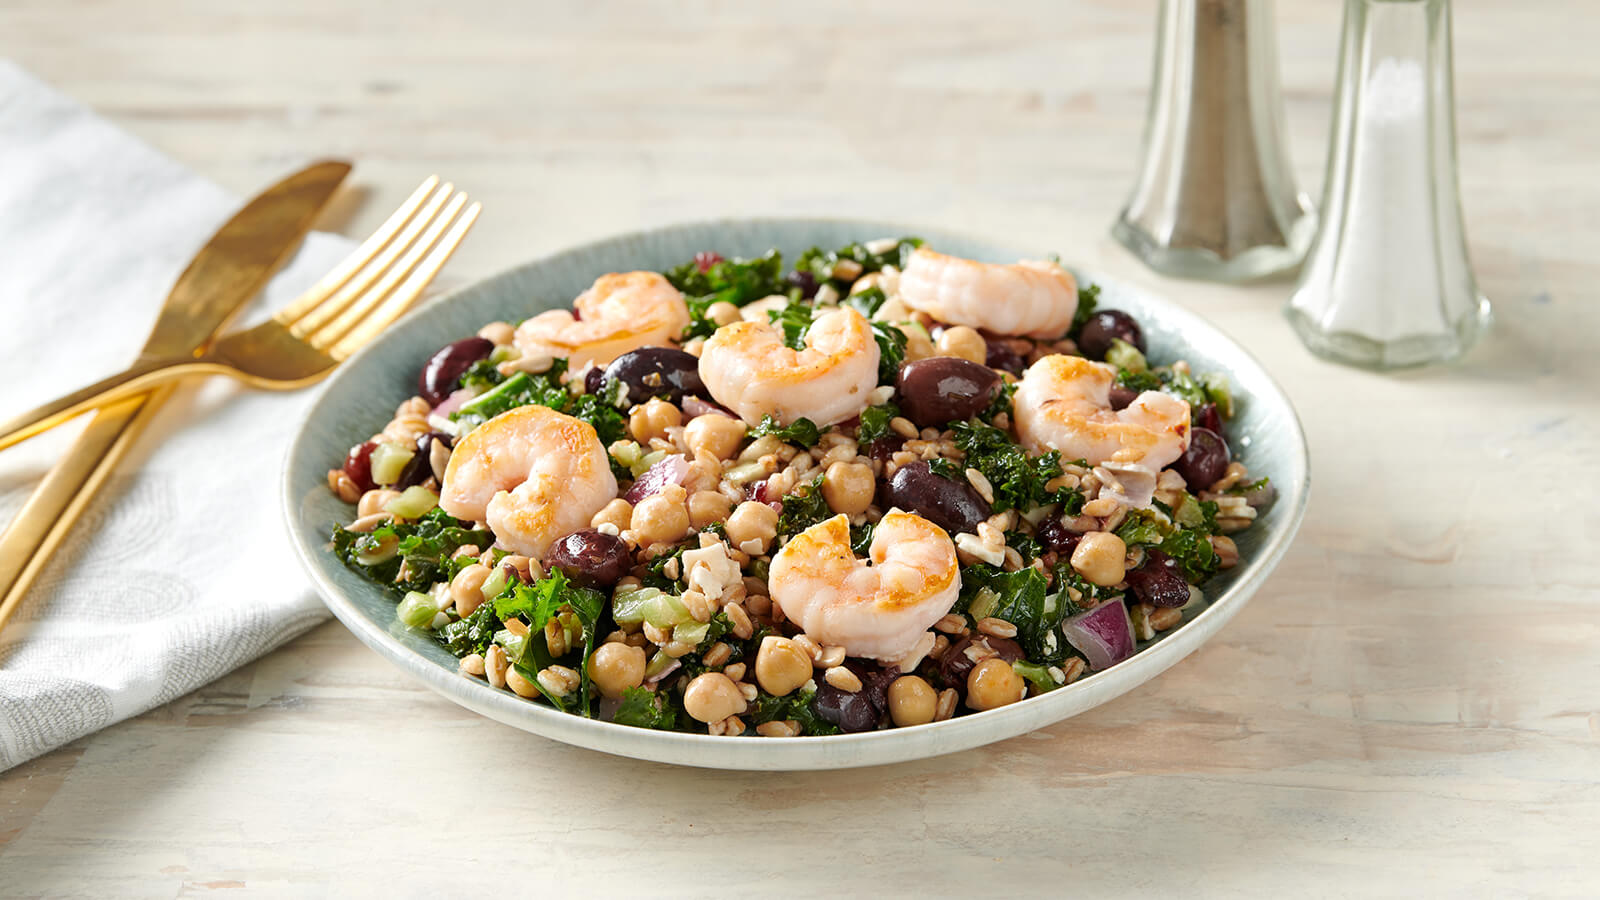 Greek Farro and Chick Pea Salad with shrimp